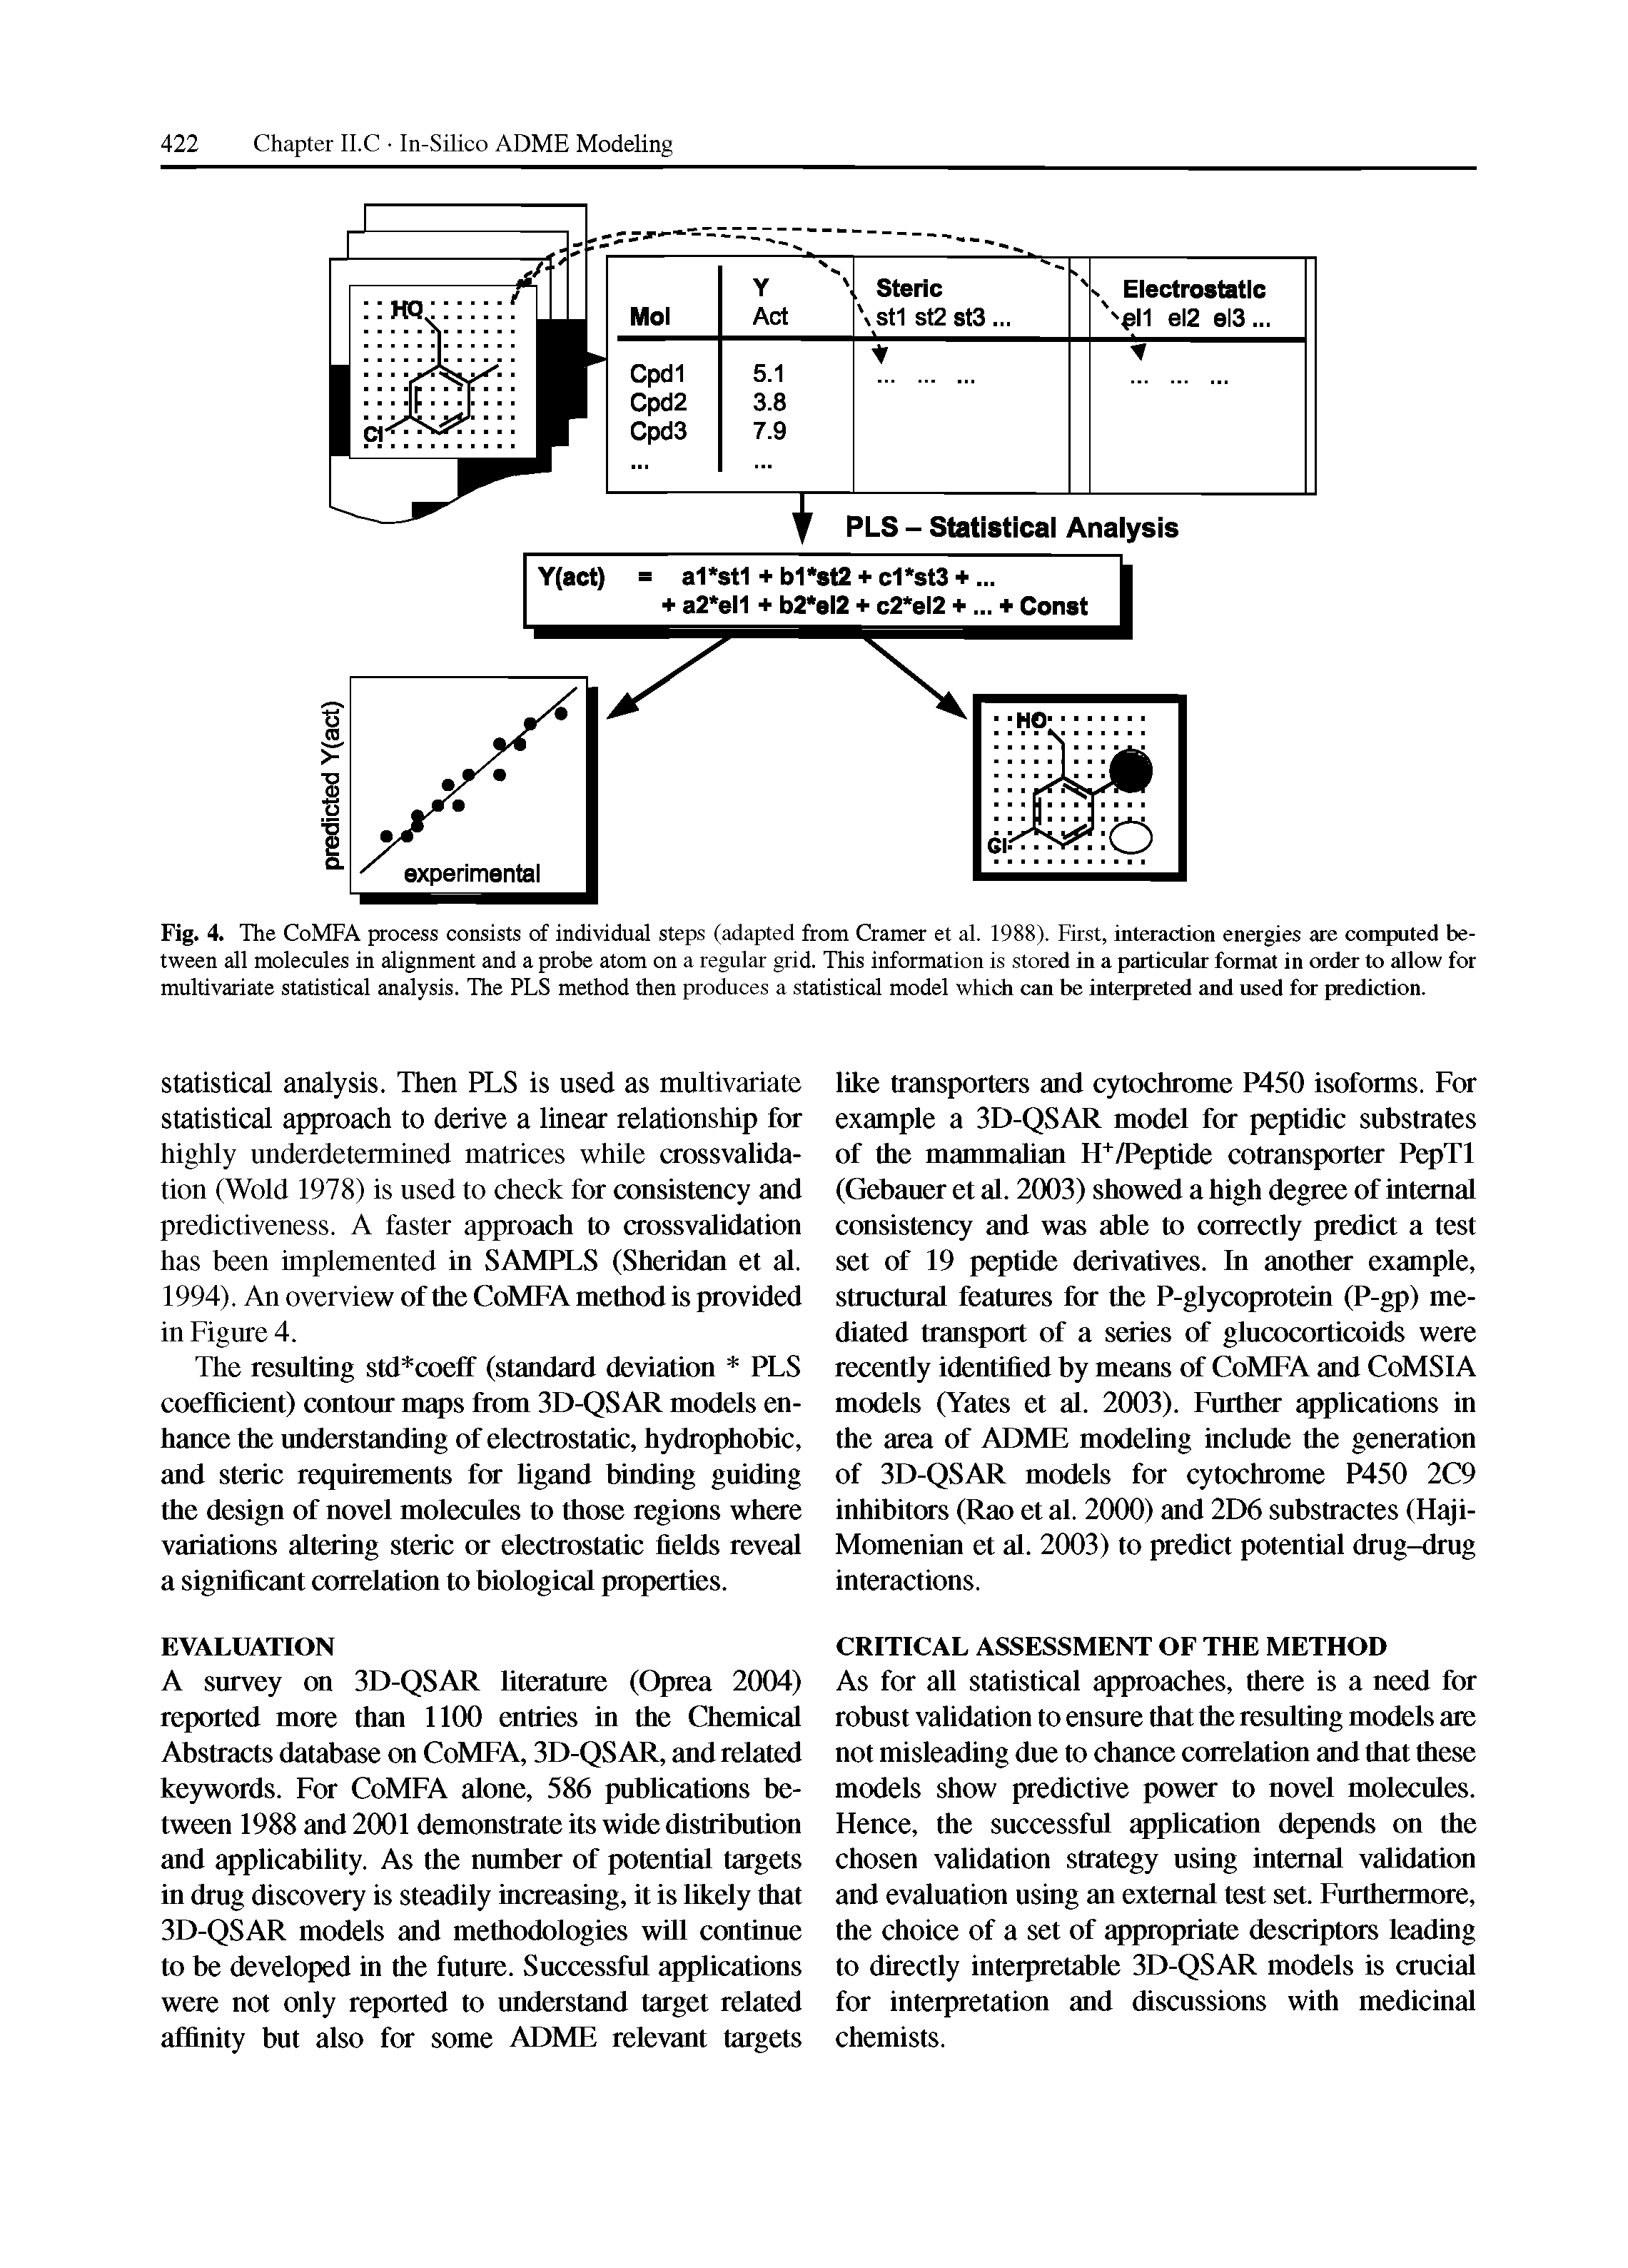 Fig. 4. The CoMFA process consists of individual steps (adapted from Cramer et al. 1988). First, interaction energies are computed between all molecules in alignment and a probe atom on a regular grid. This information is stored in a particular format in order to allow for multivariate statistical analysis. The PLS method then produces a statistical model which can be interpreted and used for prediction.